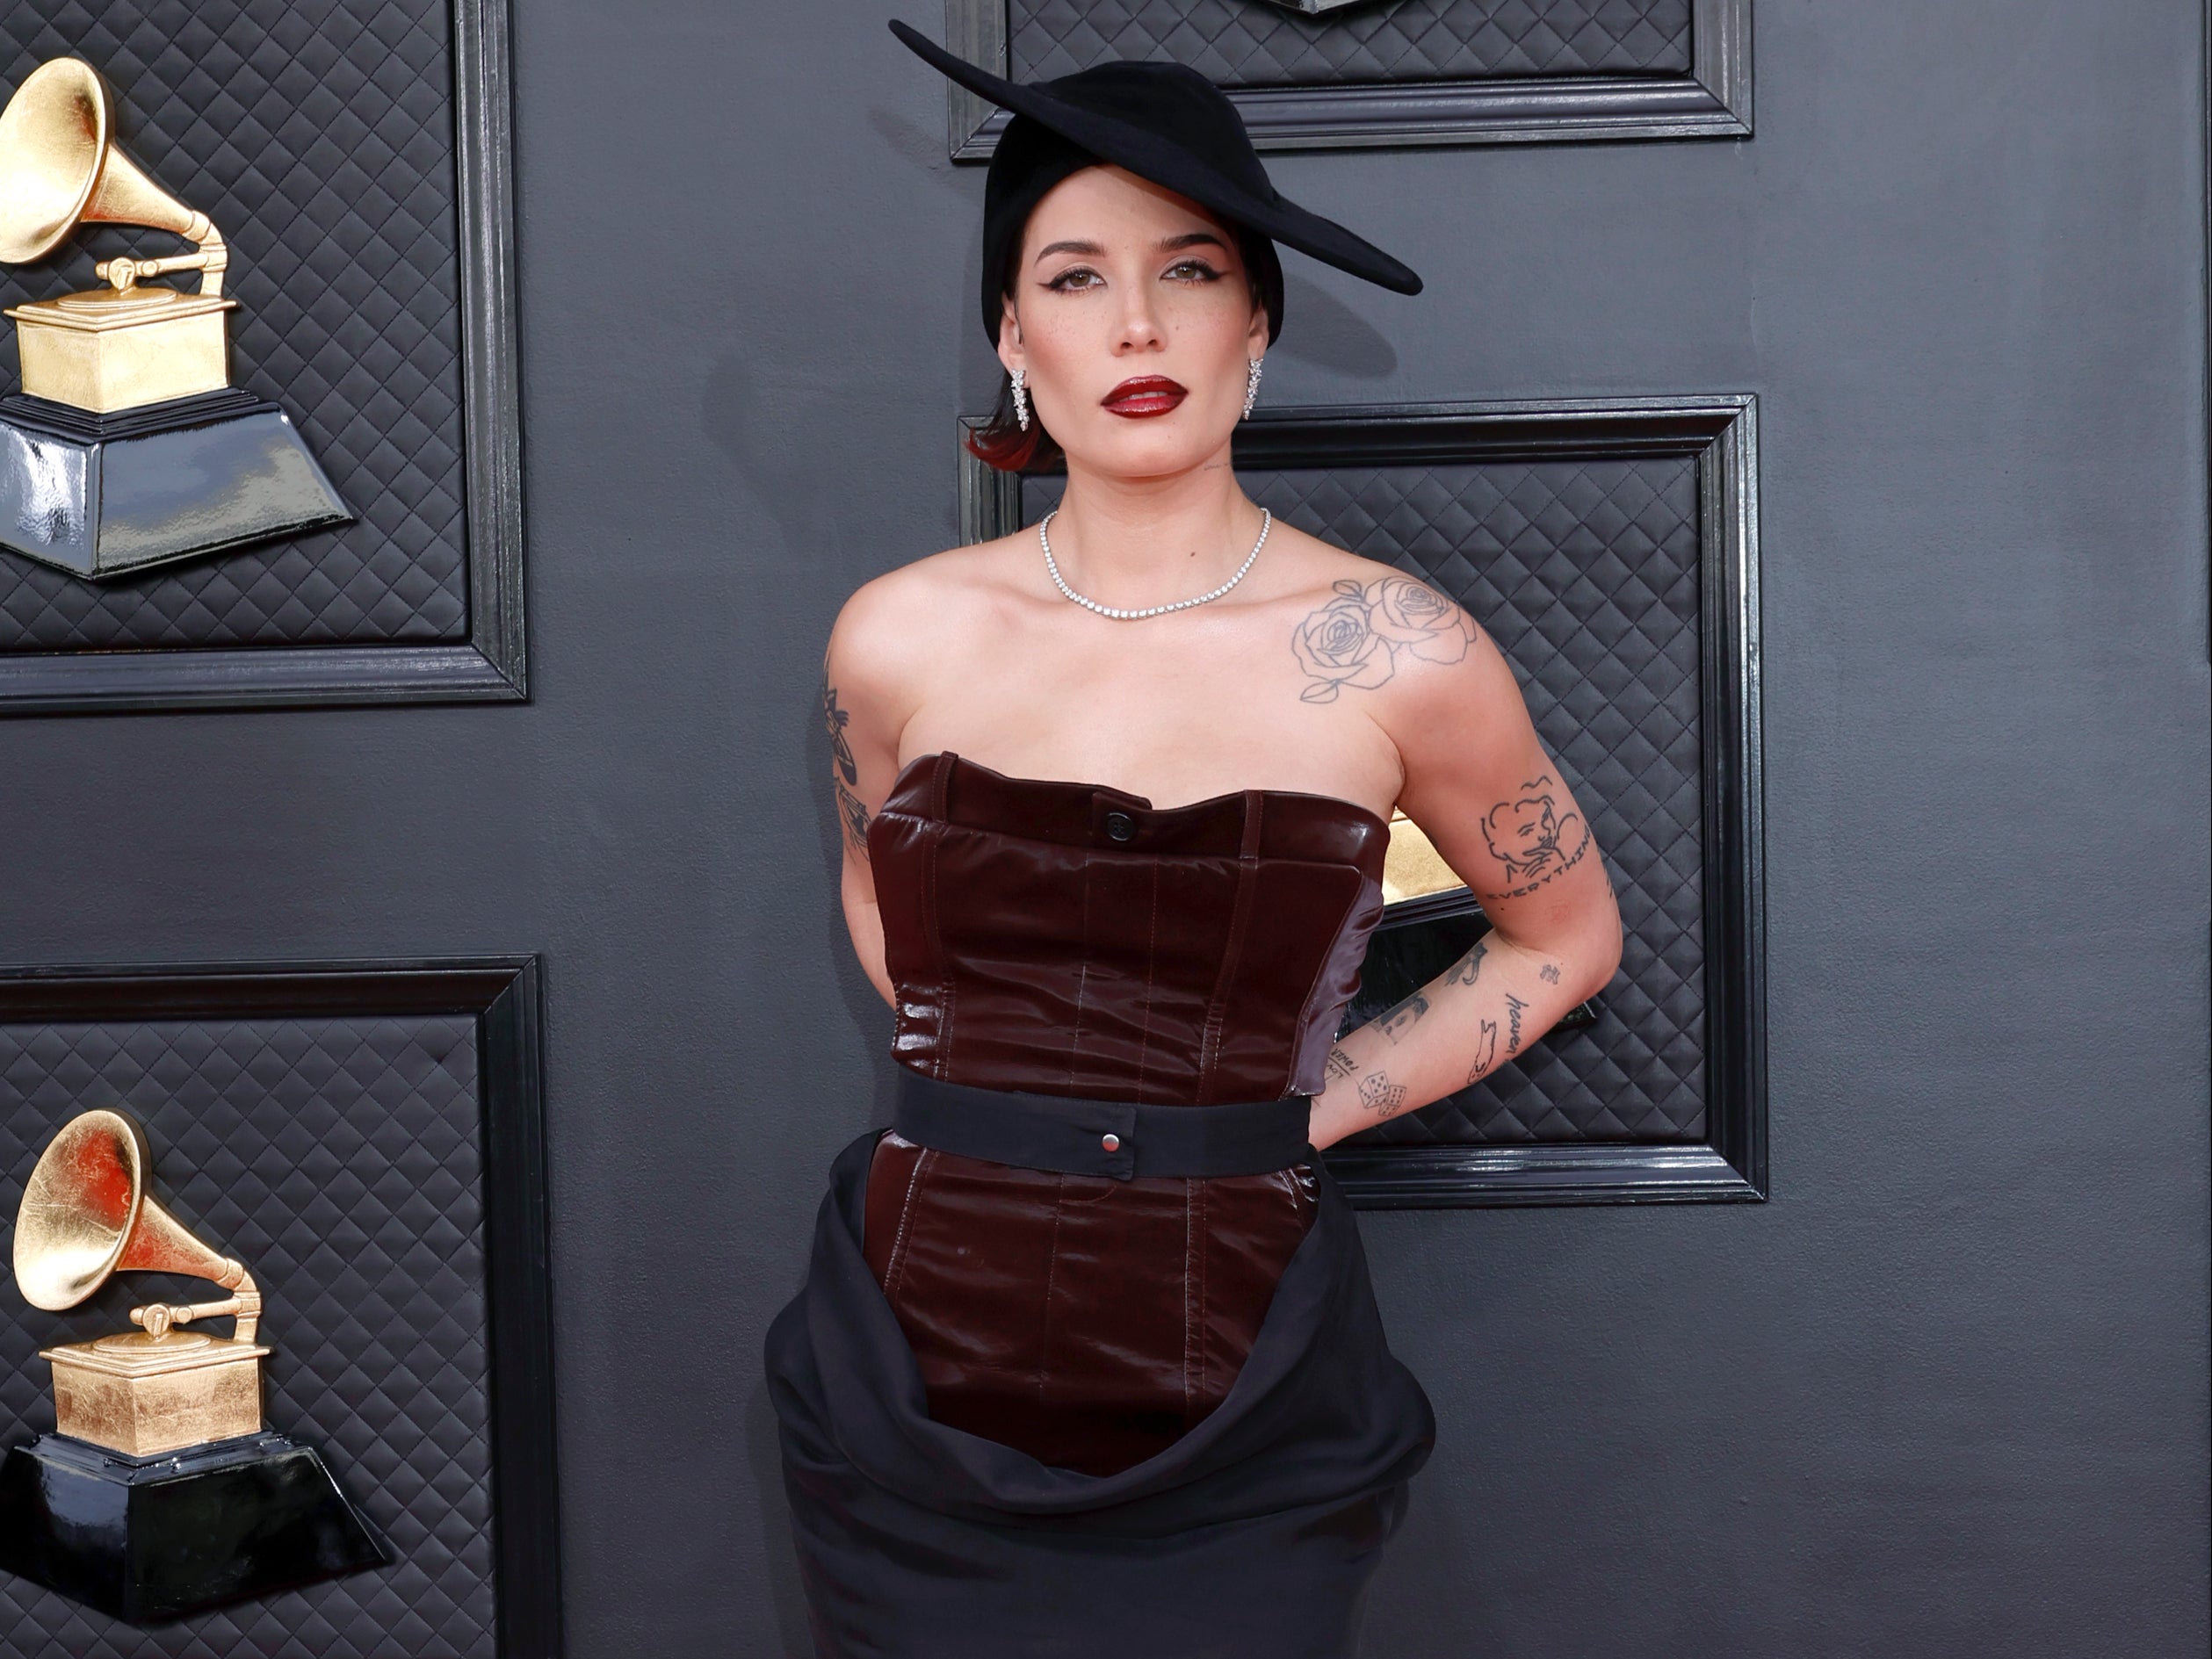 Halsey asks fans to ‘be gentle’ after revealing she had surgery three days before Grammys